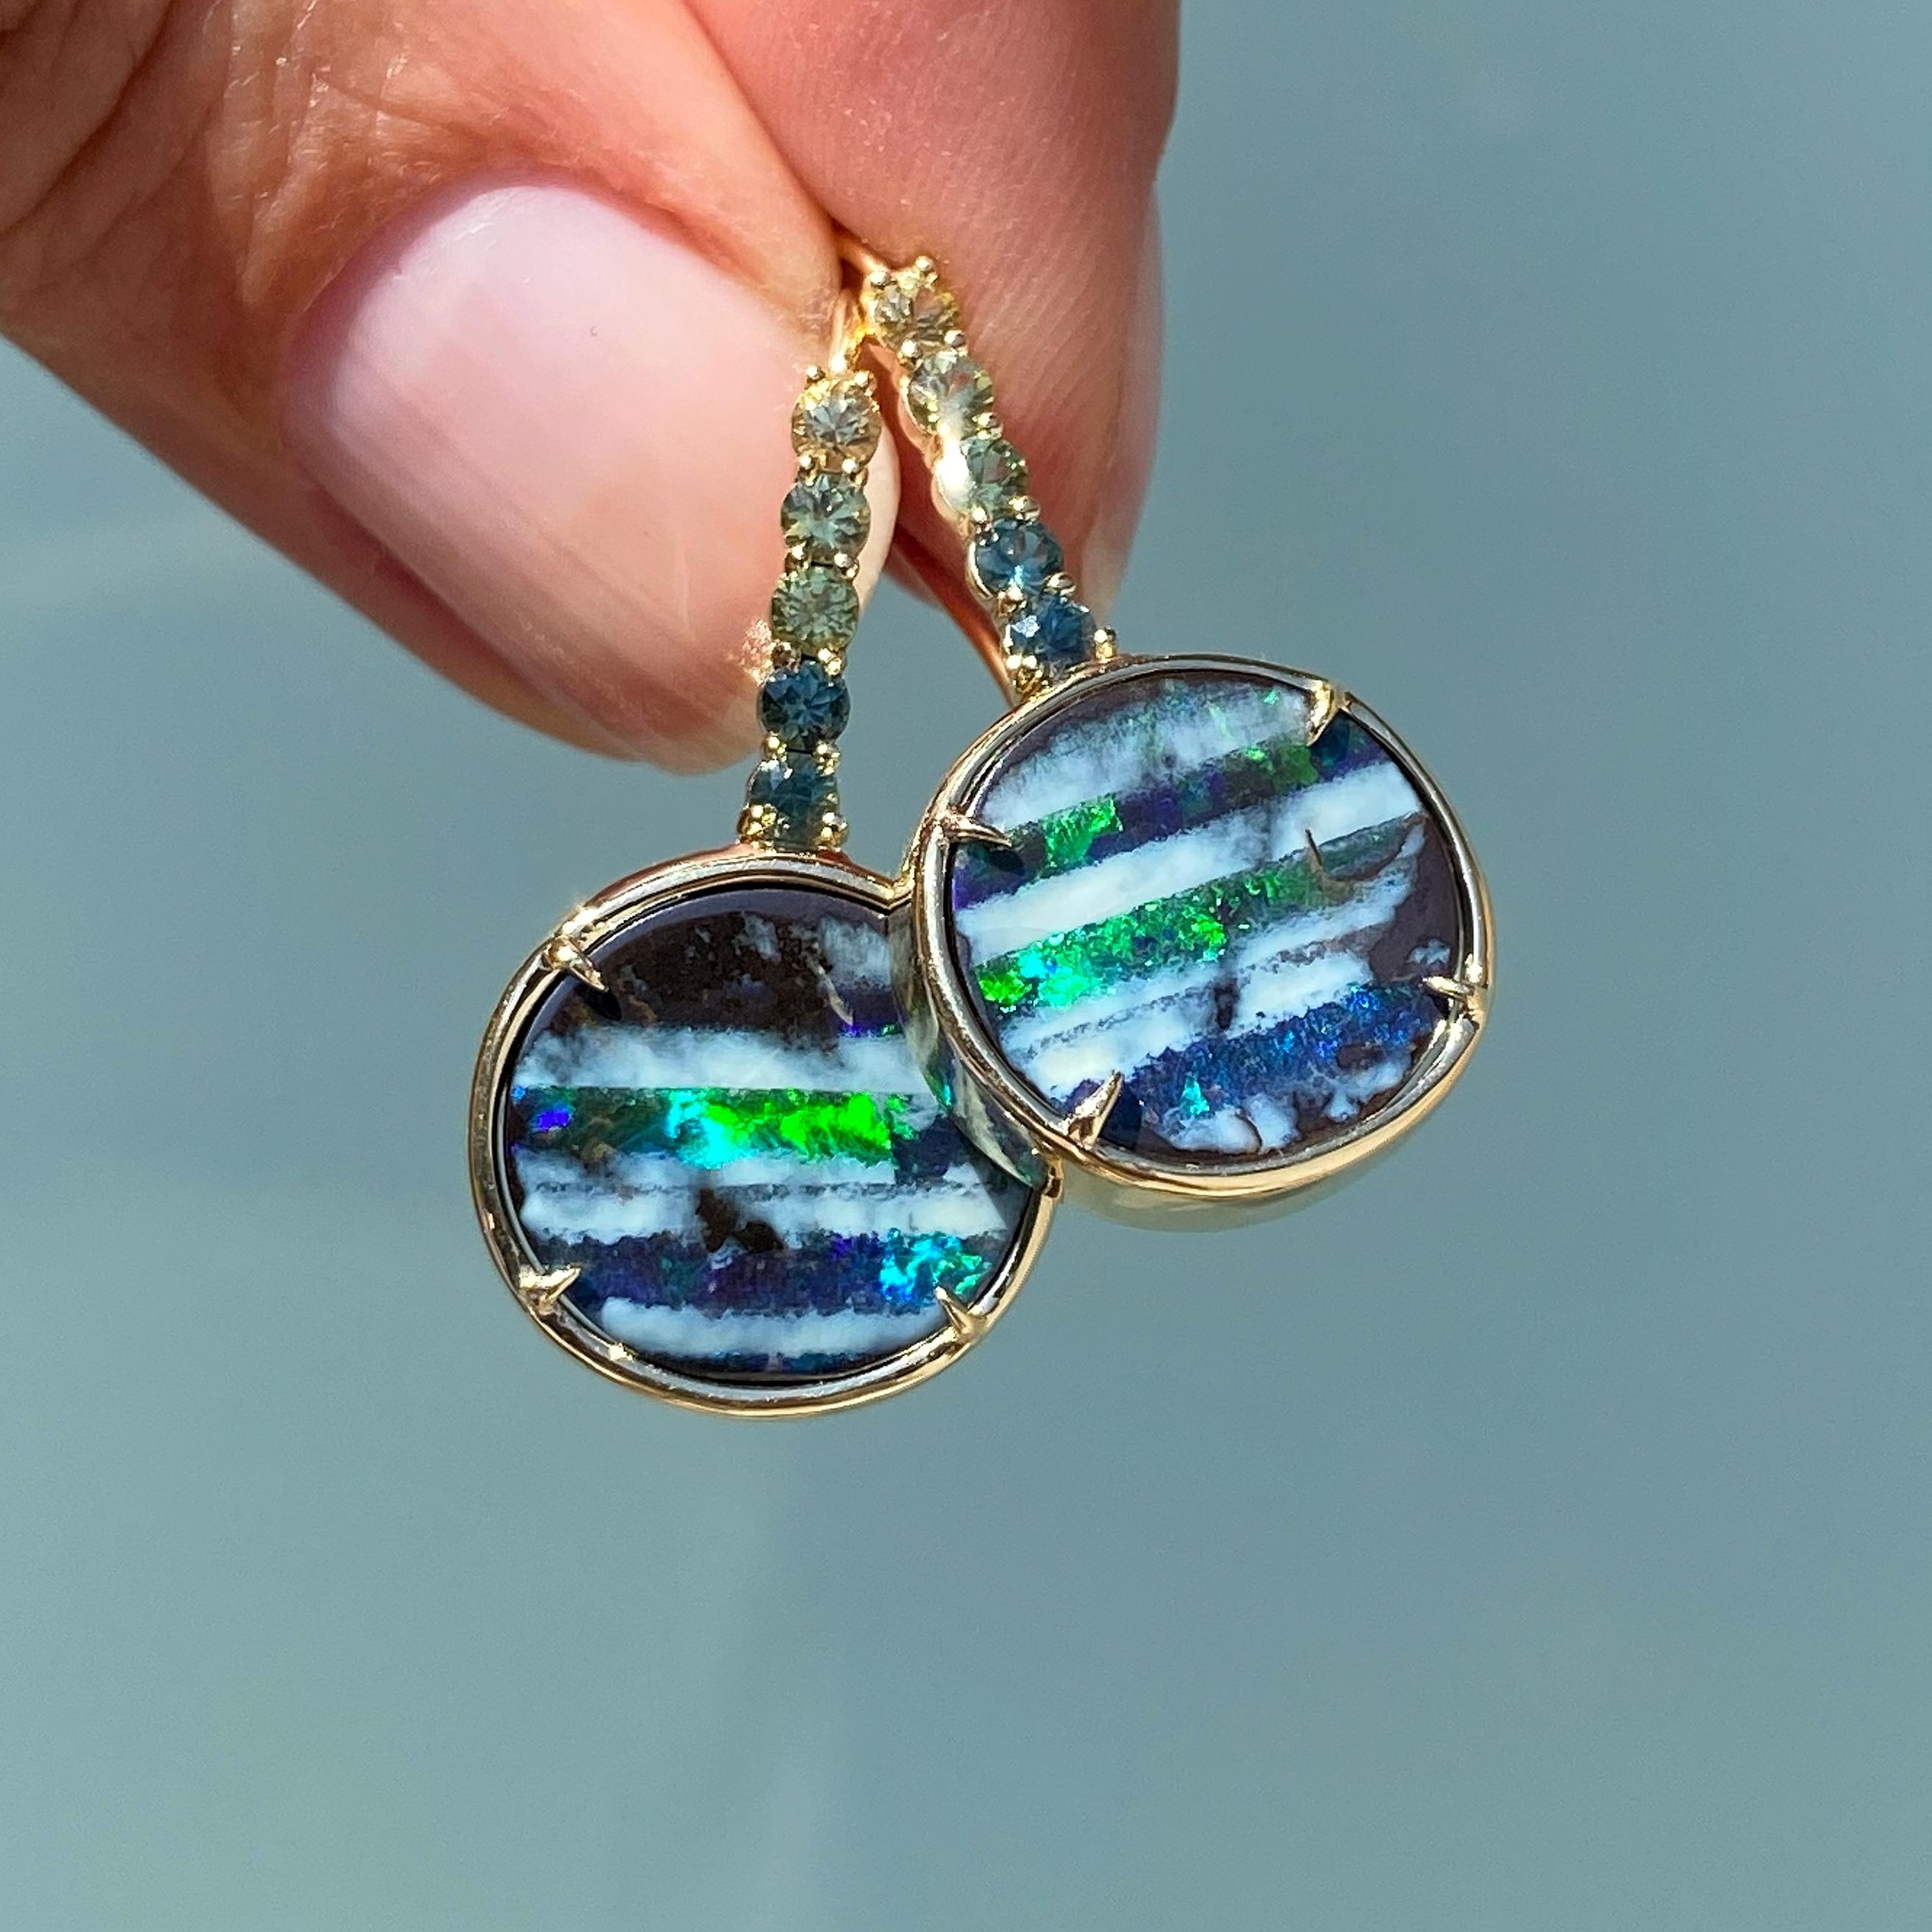 Two spectacular Australian Boulder Opals make an impression in the Galapagos Green Sapphire Opal Drop Earrings. Inspired by the legendary archipelago, these Australian opal earrings reflect the dark volcanic terrain, the white sand beaches, rolling